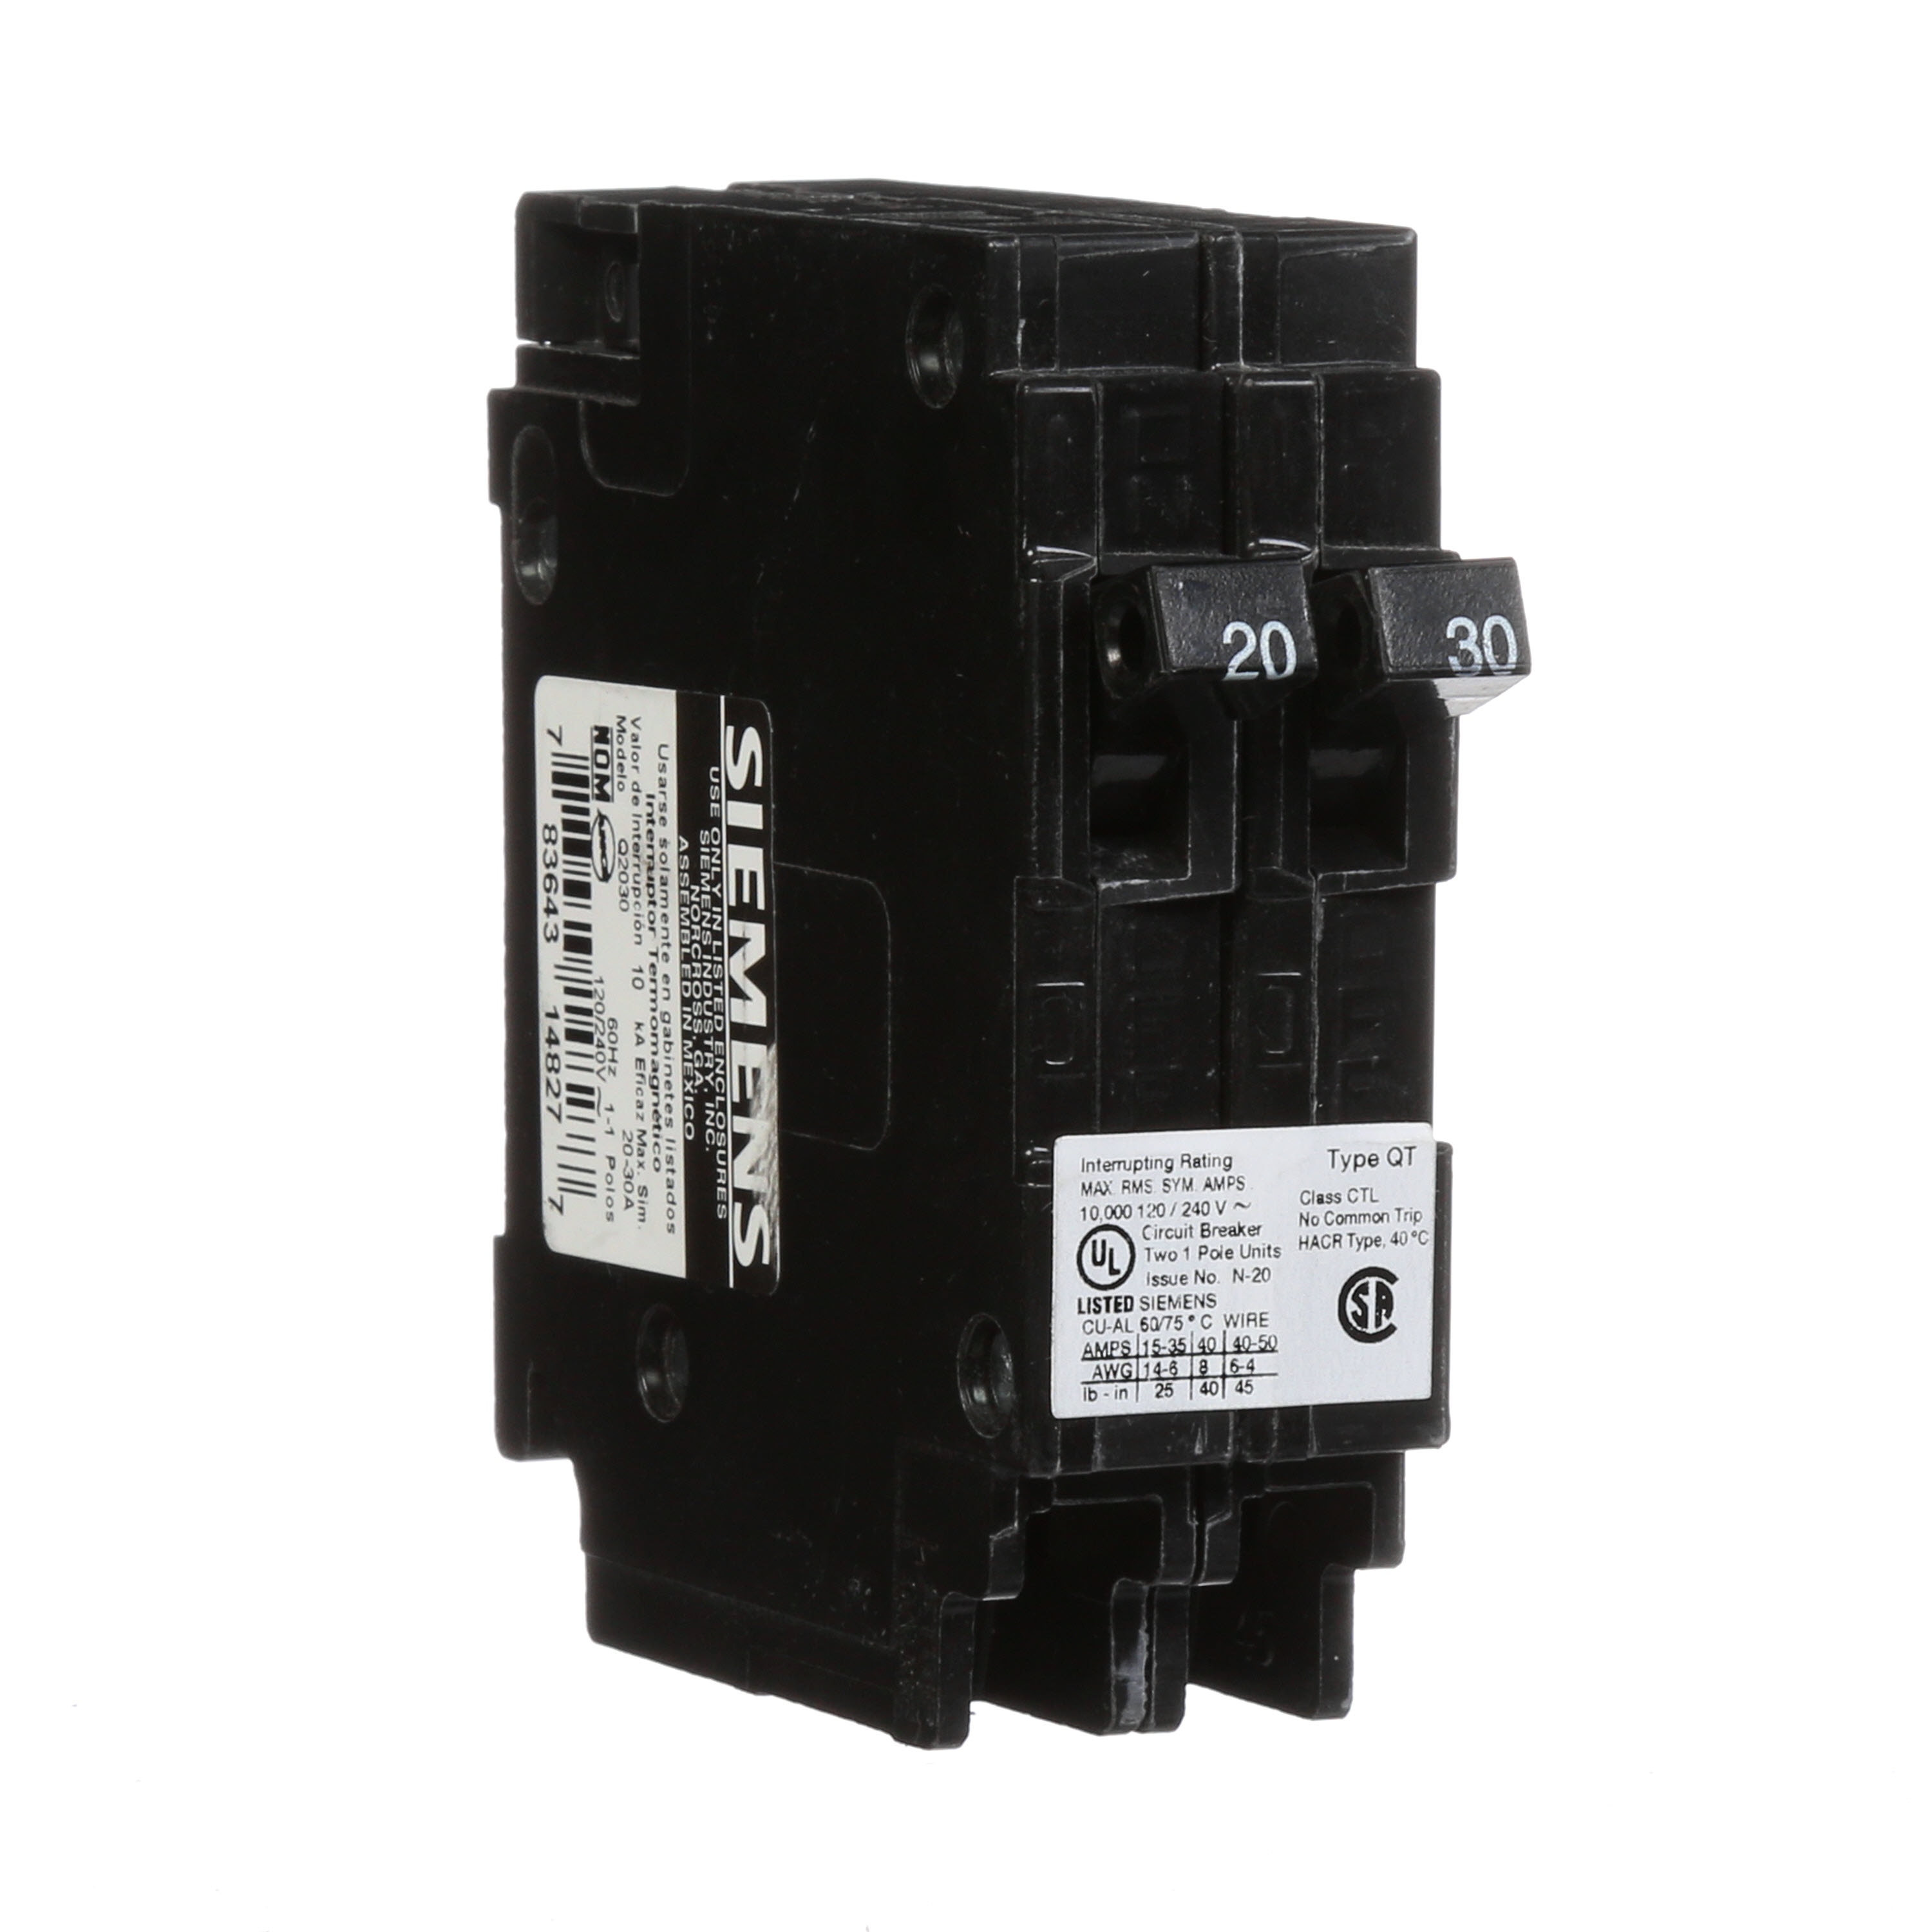 Siemens Q2030 One 20-Amp and One 30-Amp Single Pole 120V Circuit Breaker 